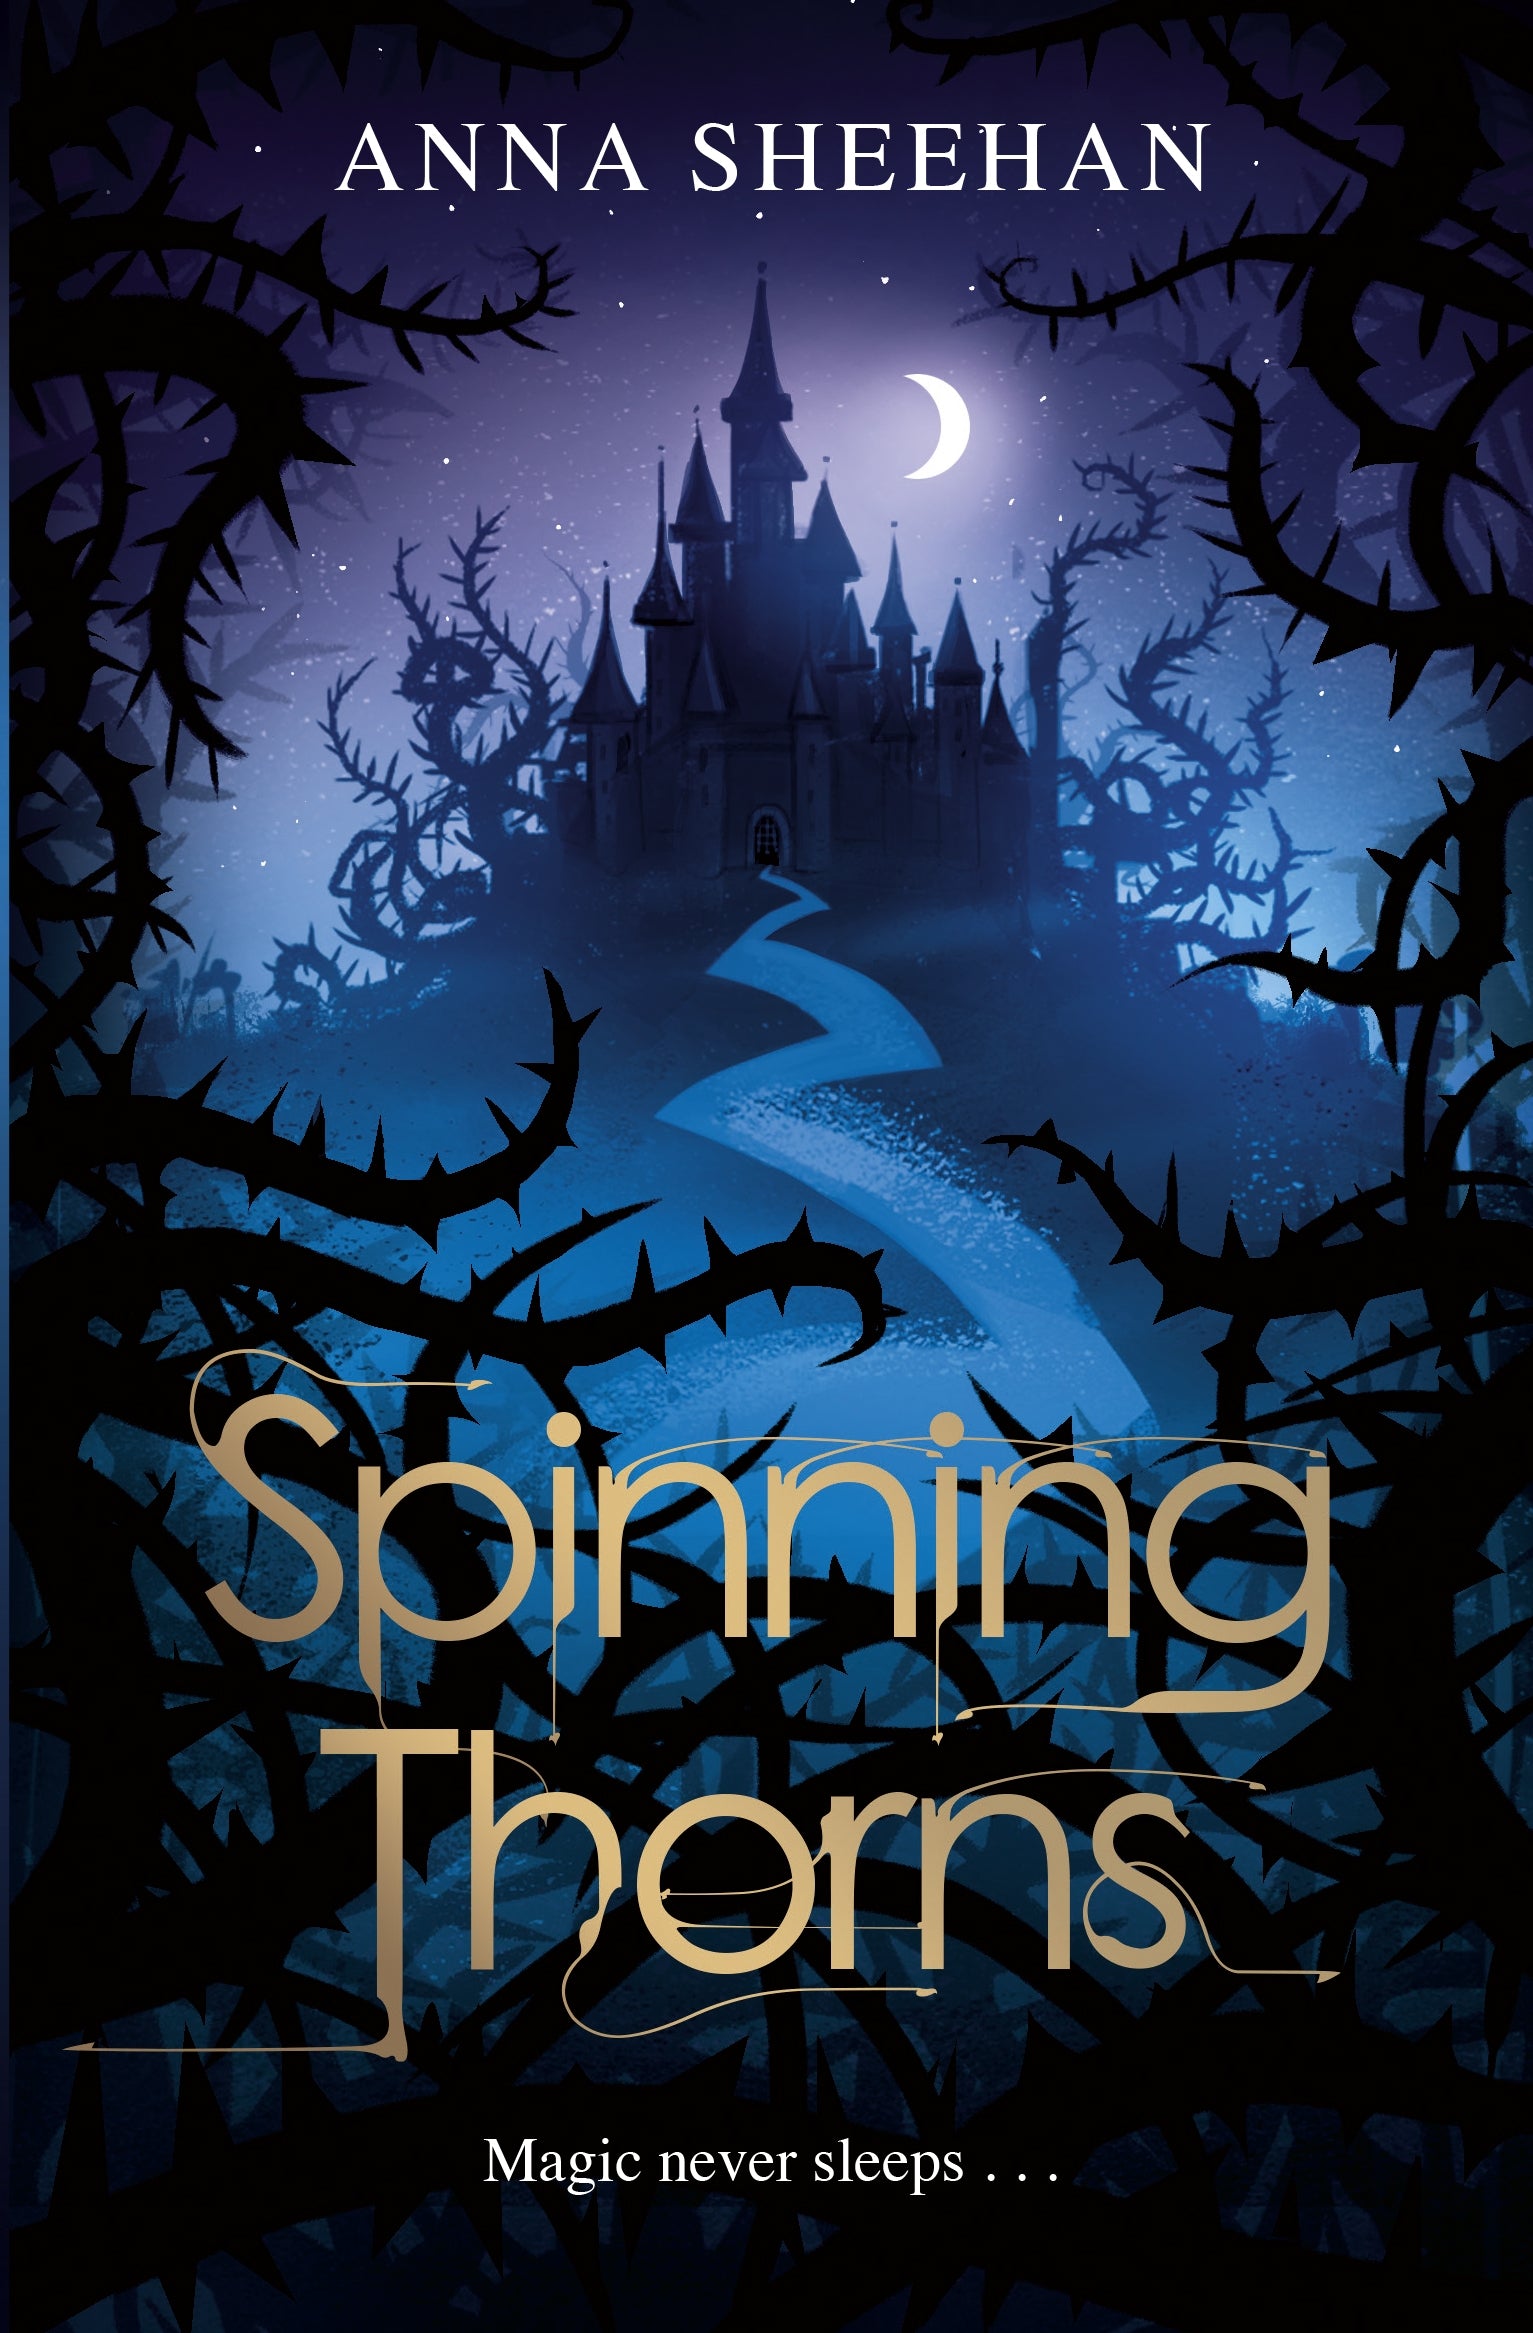 Spinning Thorns by Anna Sheehan